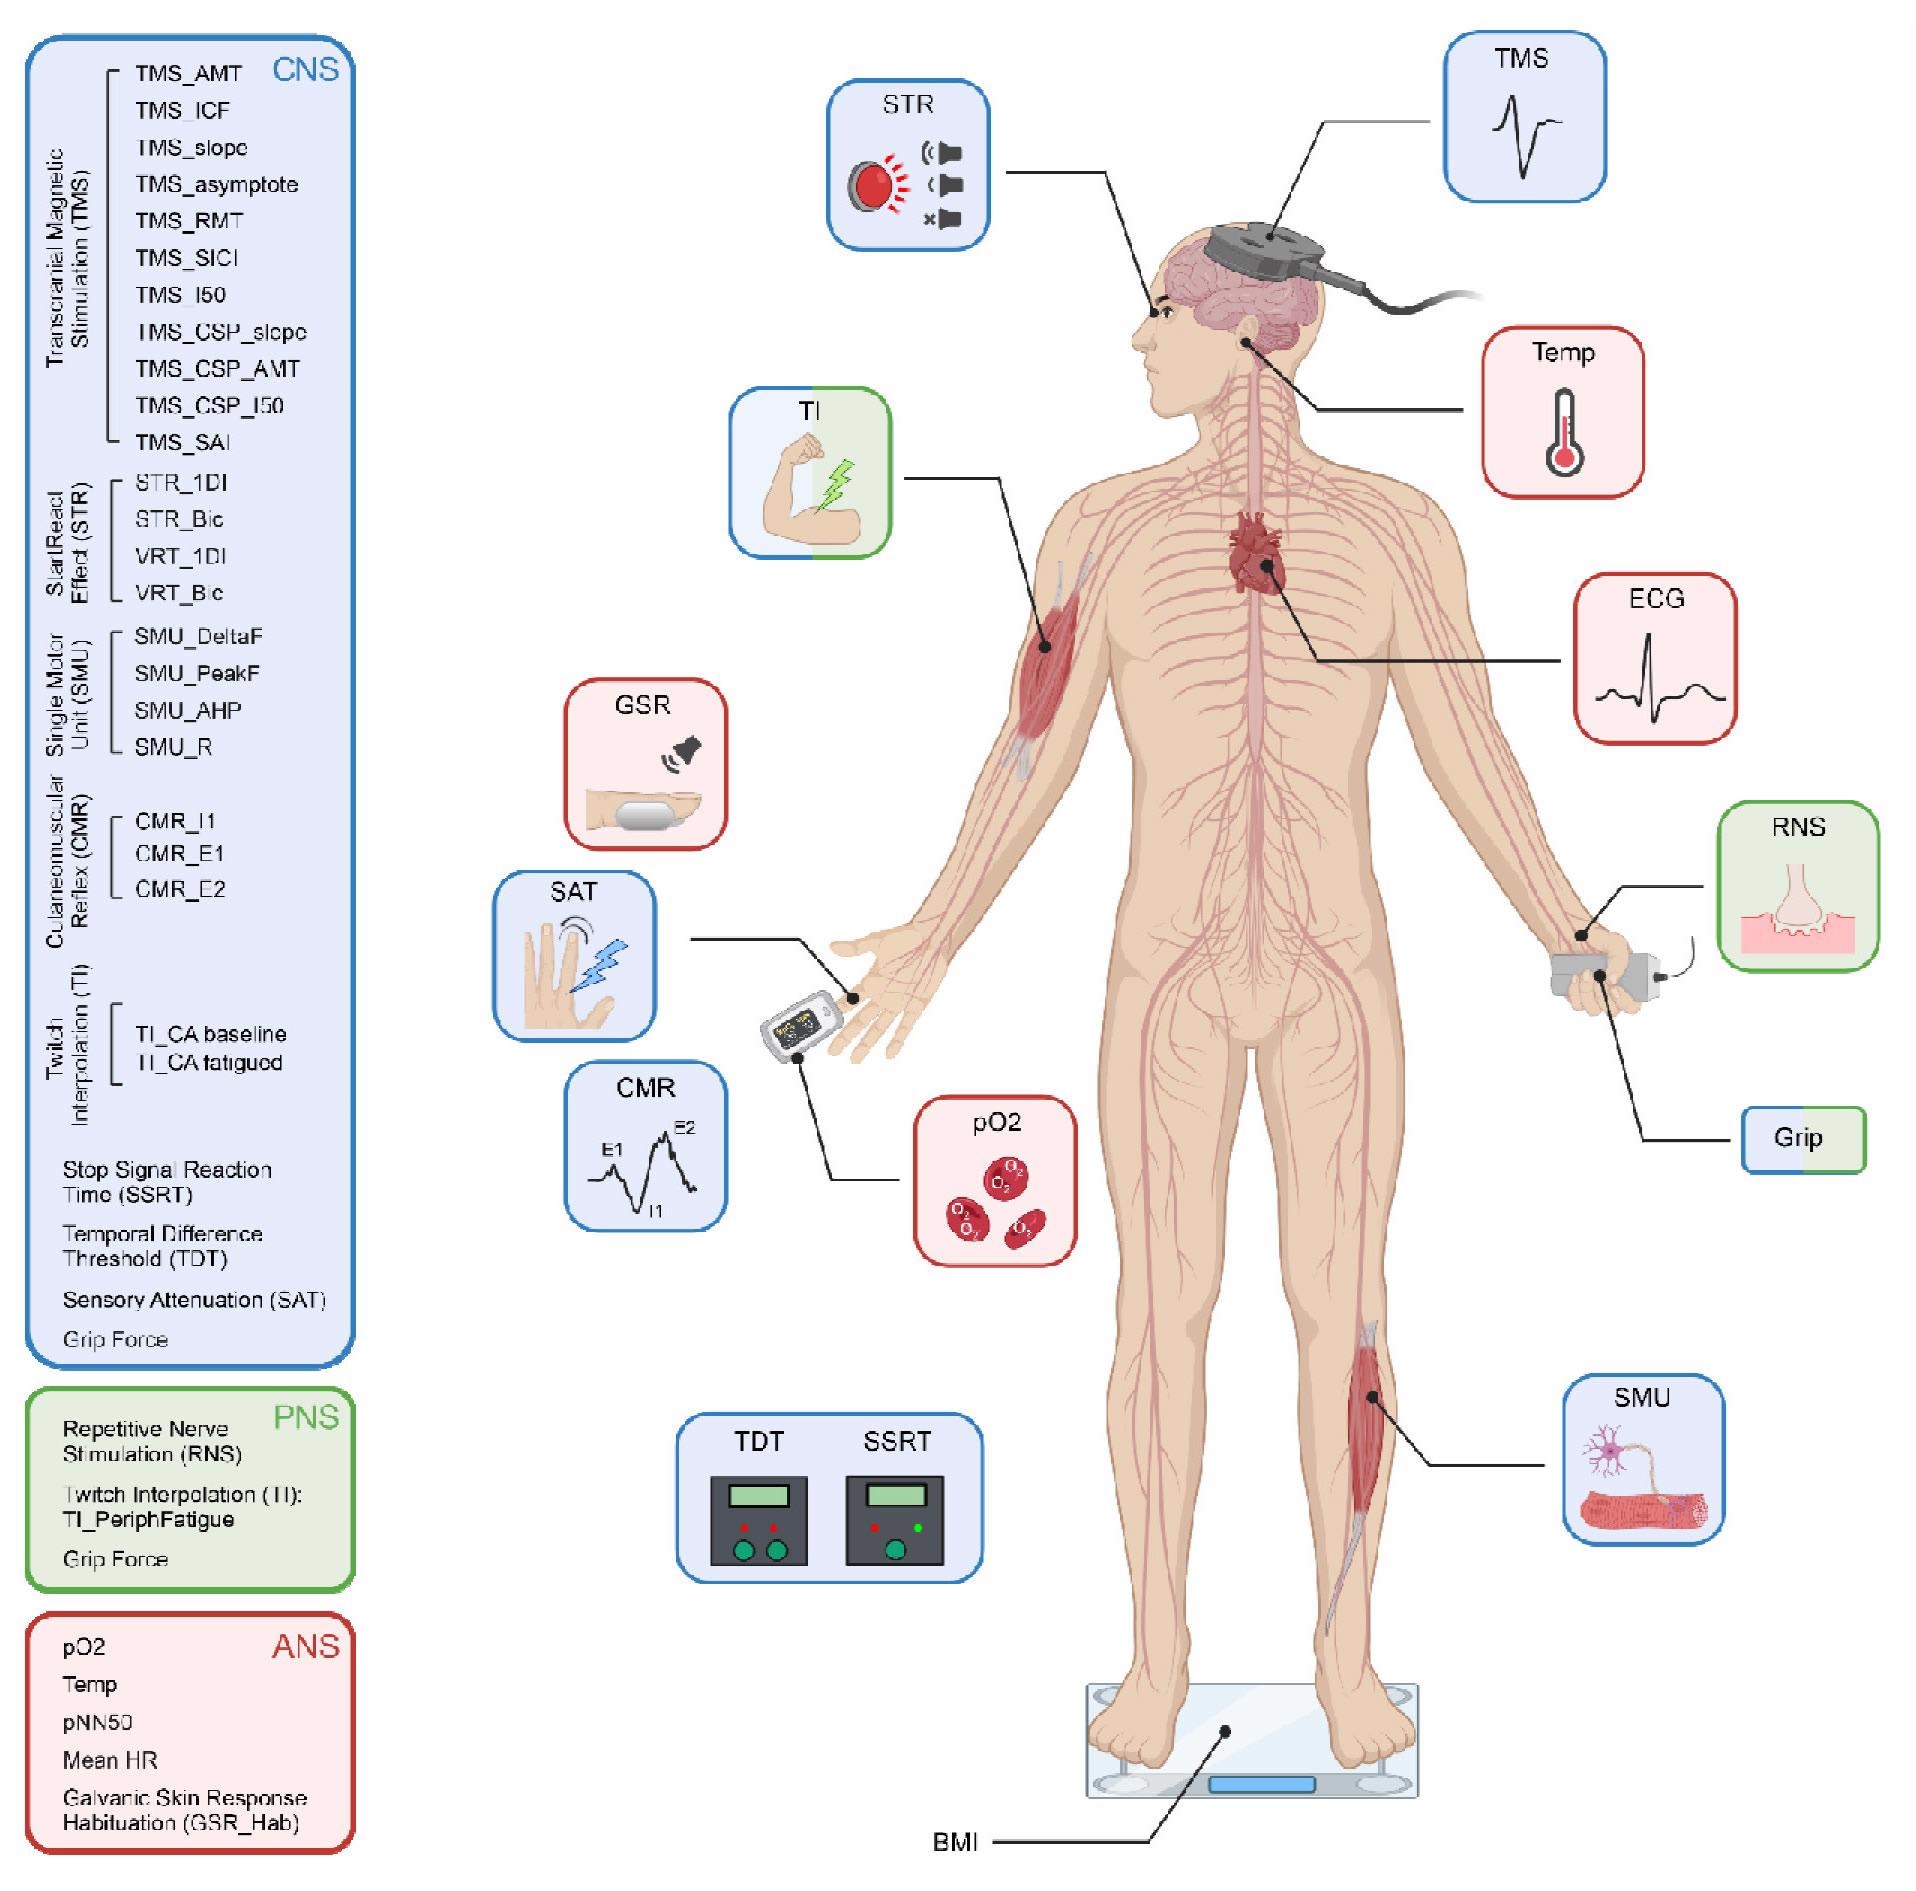 Schematic representation of the different tests performed, color coded according to which components of the central, peripheral and autonomic nervous systems (CNS, PNS, ANS) they assessed.  TMS, transcranial magnetic stimulation;  ECG, electrocardiogram;  RNS, repetitive nerve stimulation;  SMU, single motor unit recording;  BMI, body mass index;  TDT, temporal difference threshold;  SSRT, stop signal reaction time;  pO2, blood oxygen saturation;  CMR, cutaneomuscular reflex;  SAT, sensory attenuation with movement;  GSR, habituation of the galvanic skin response to loud sound;  TI, twitch interpolation, STR, StartReact effect.